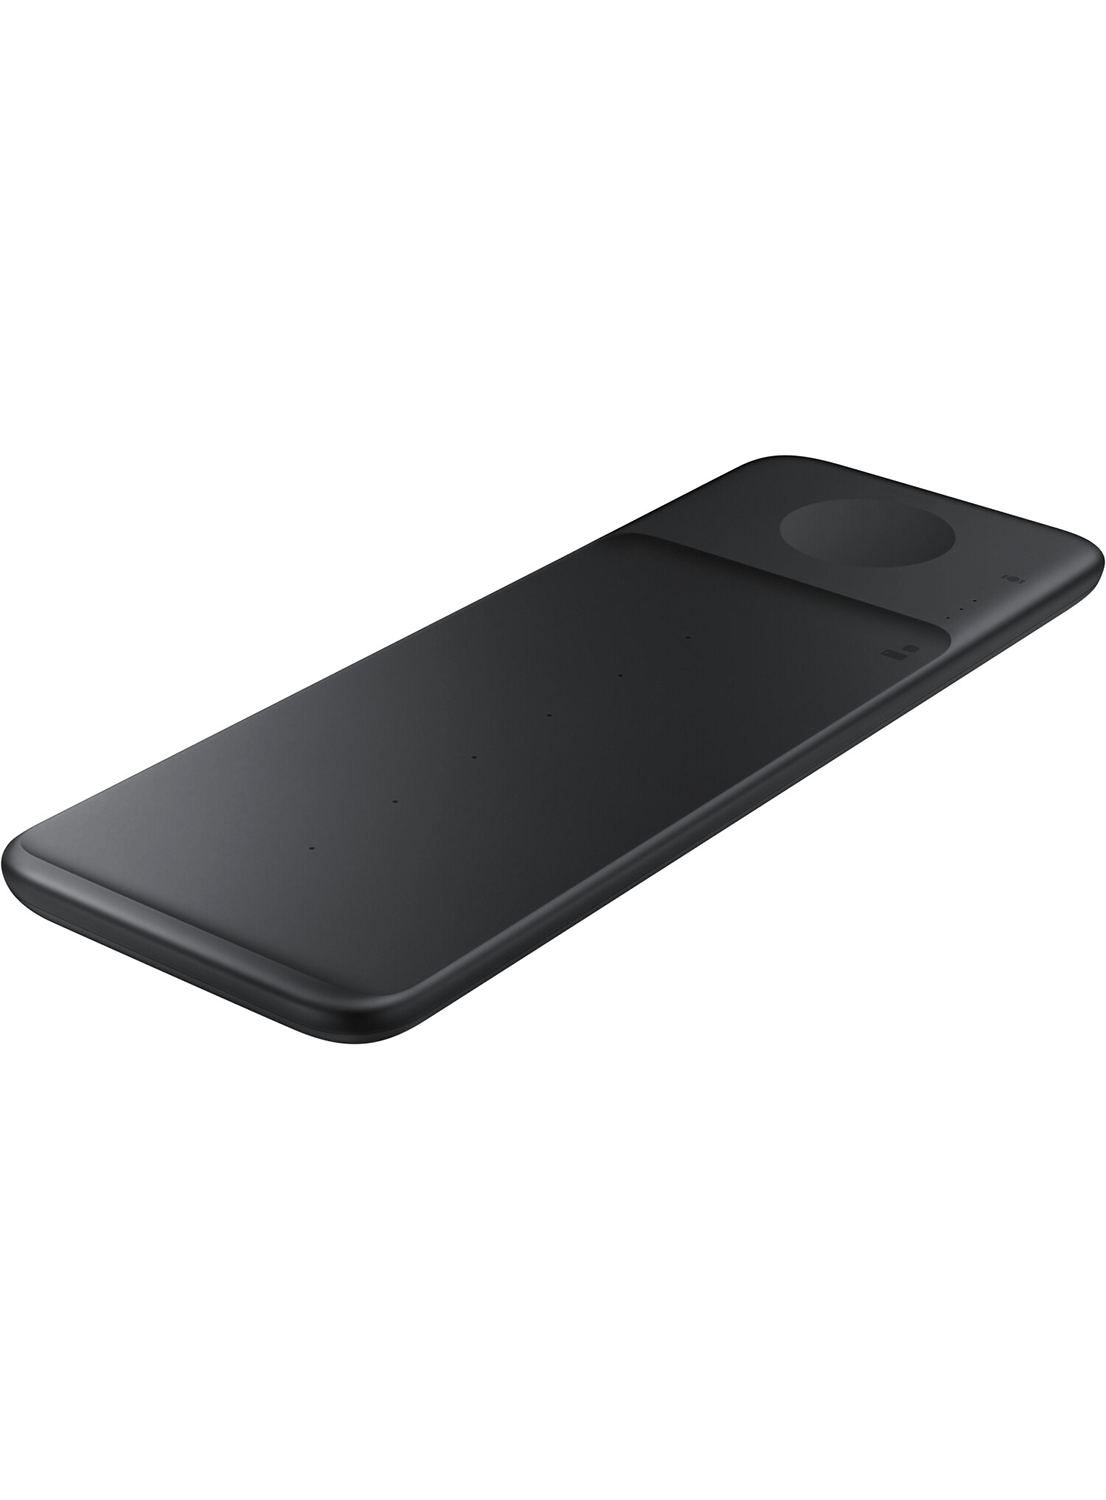 Samsung Wireless Charger Trio Pad (EP-P6300)